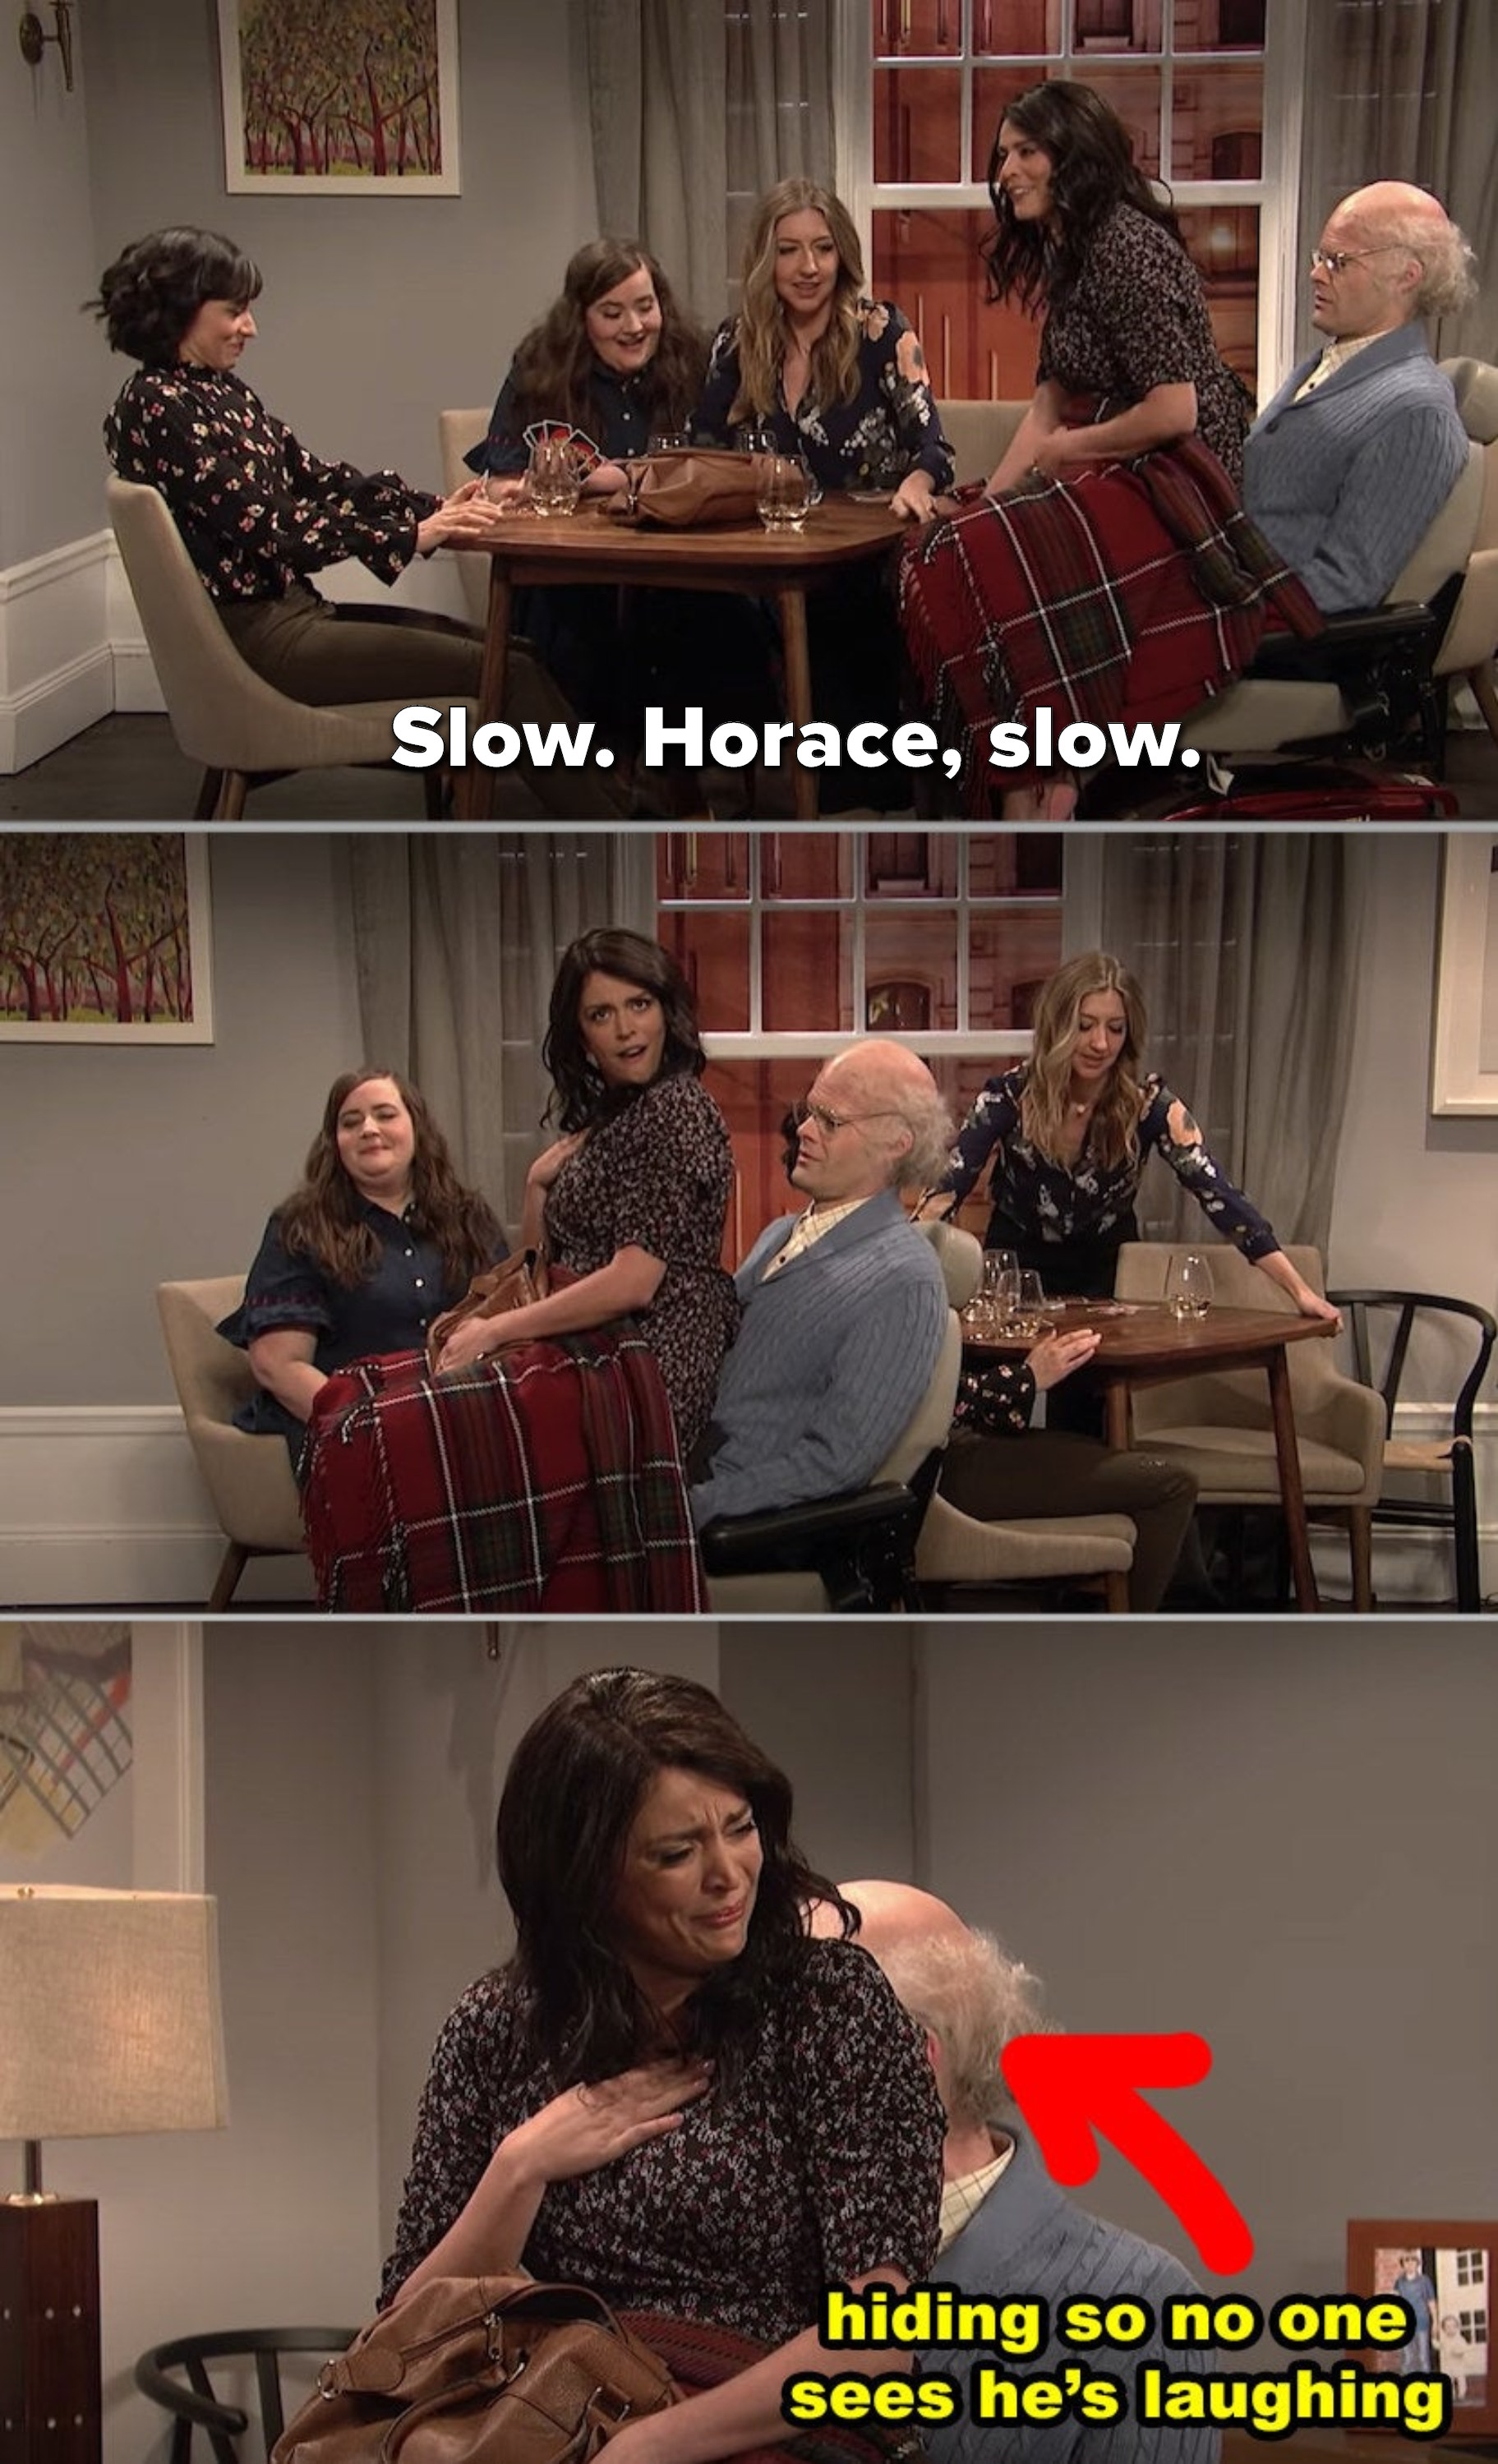 Multiple actors in a comedic sketch on a set resembling a living room with text bubbles indicating dialogue and humor